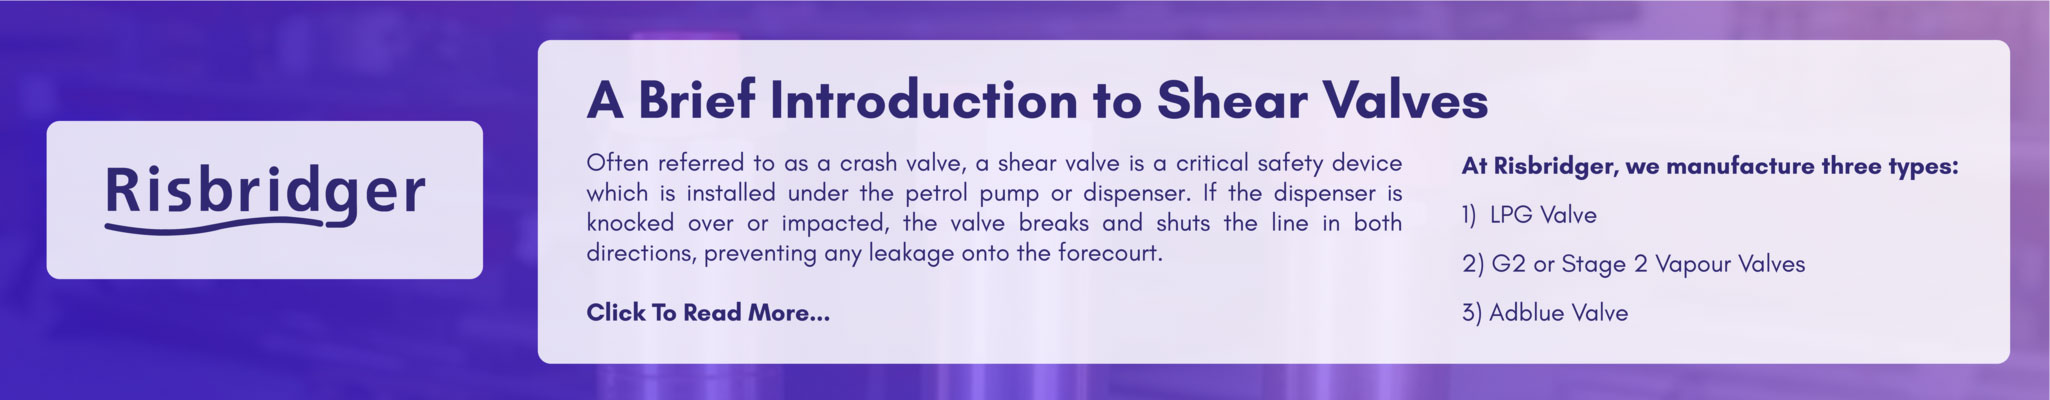 A Brief Introduction to Shear Valves